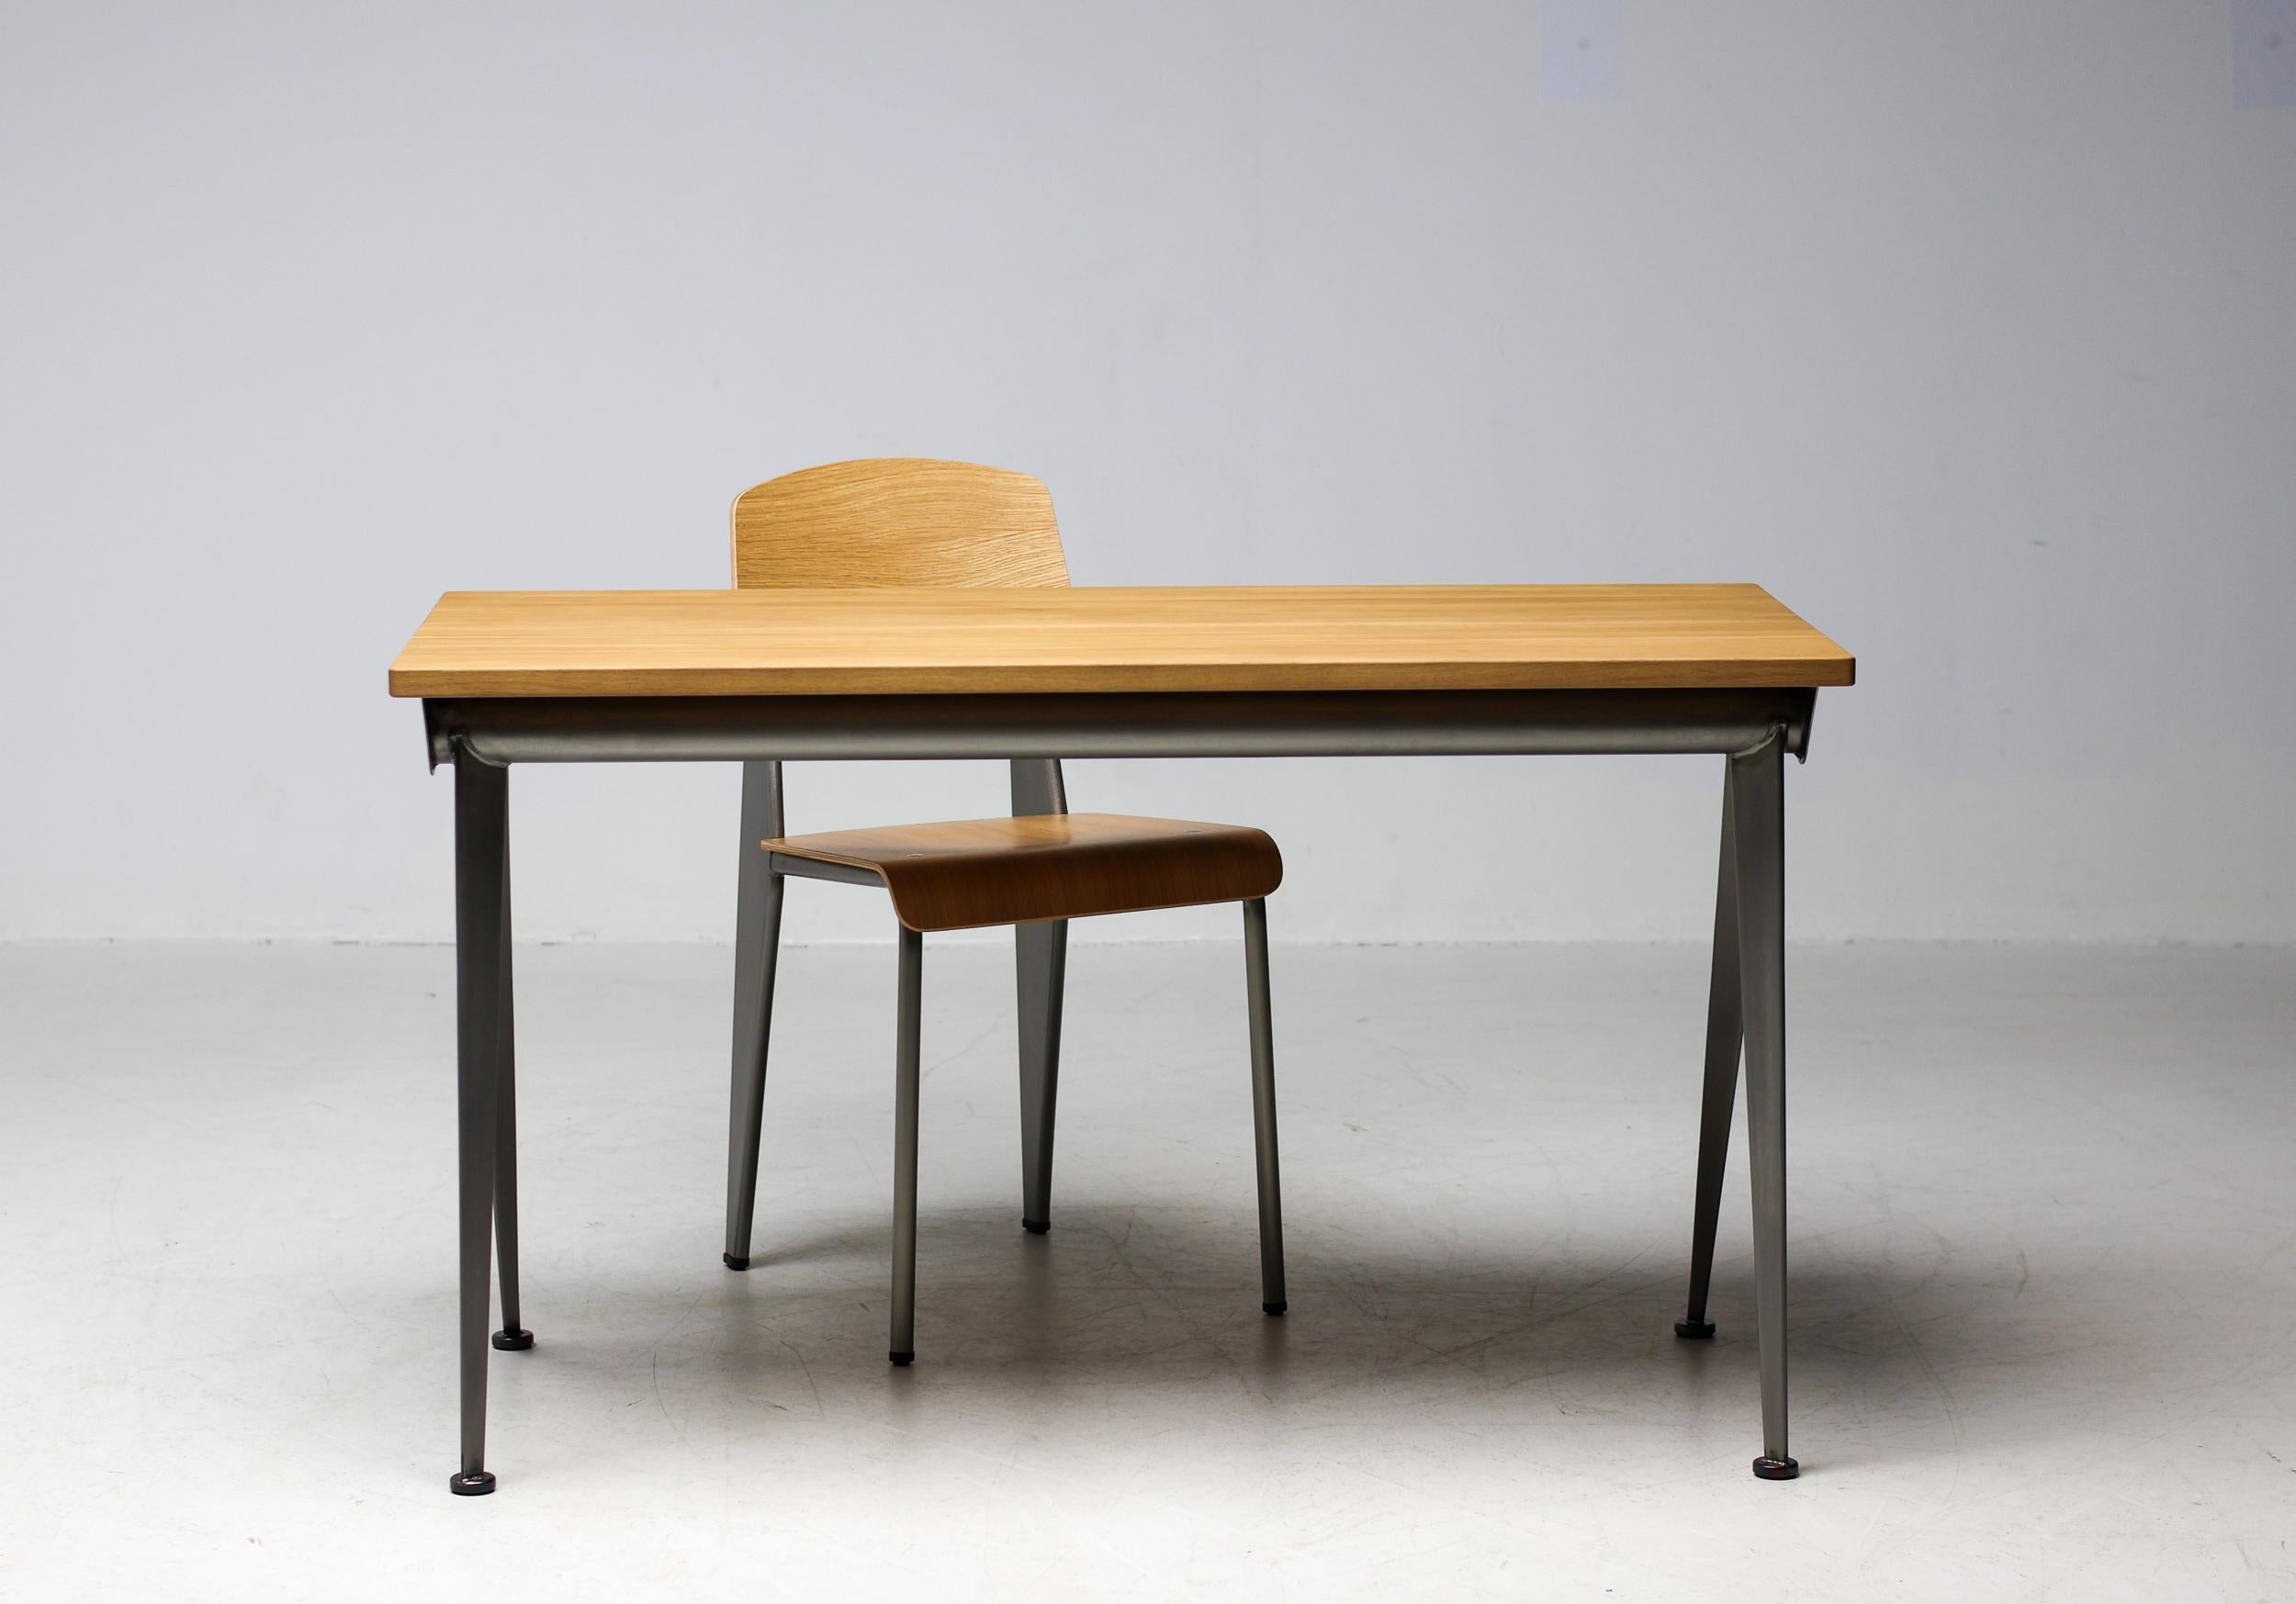 Jean Prouvé Compass direction desk in natural oak and clear lacquered steel for Vitra. Originally designed in 1953, Prouvé's iconic desk is based the design on the structural principles for which he is known. Common to all of them are the slender,